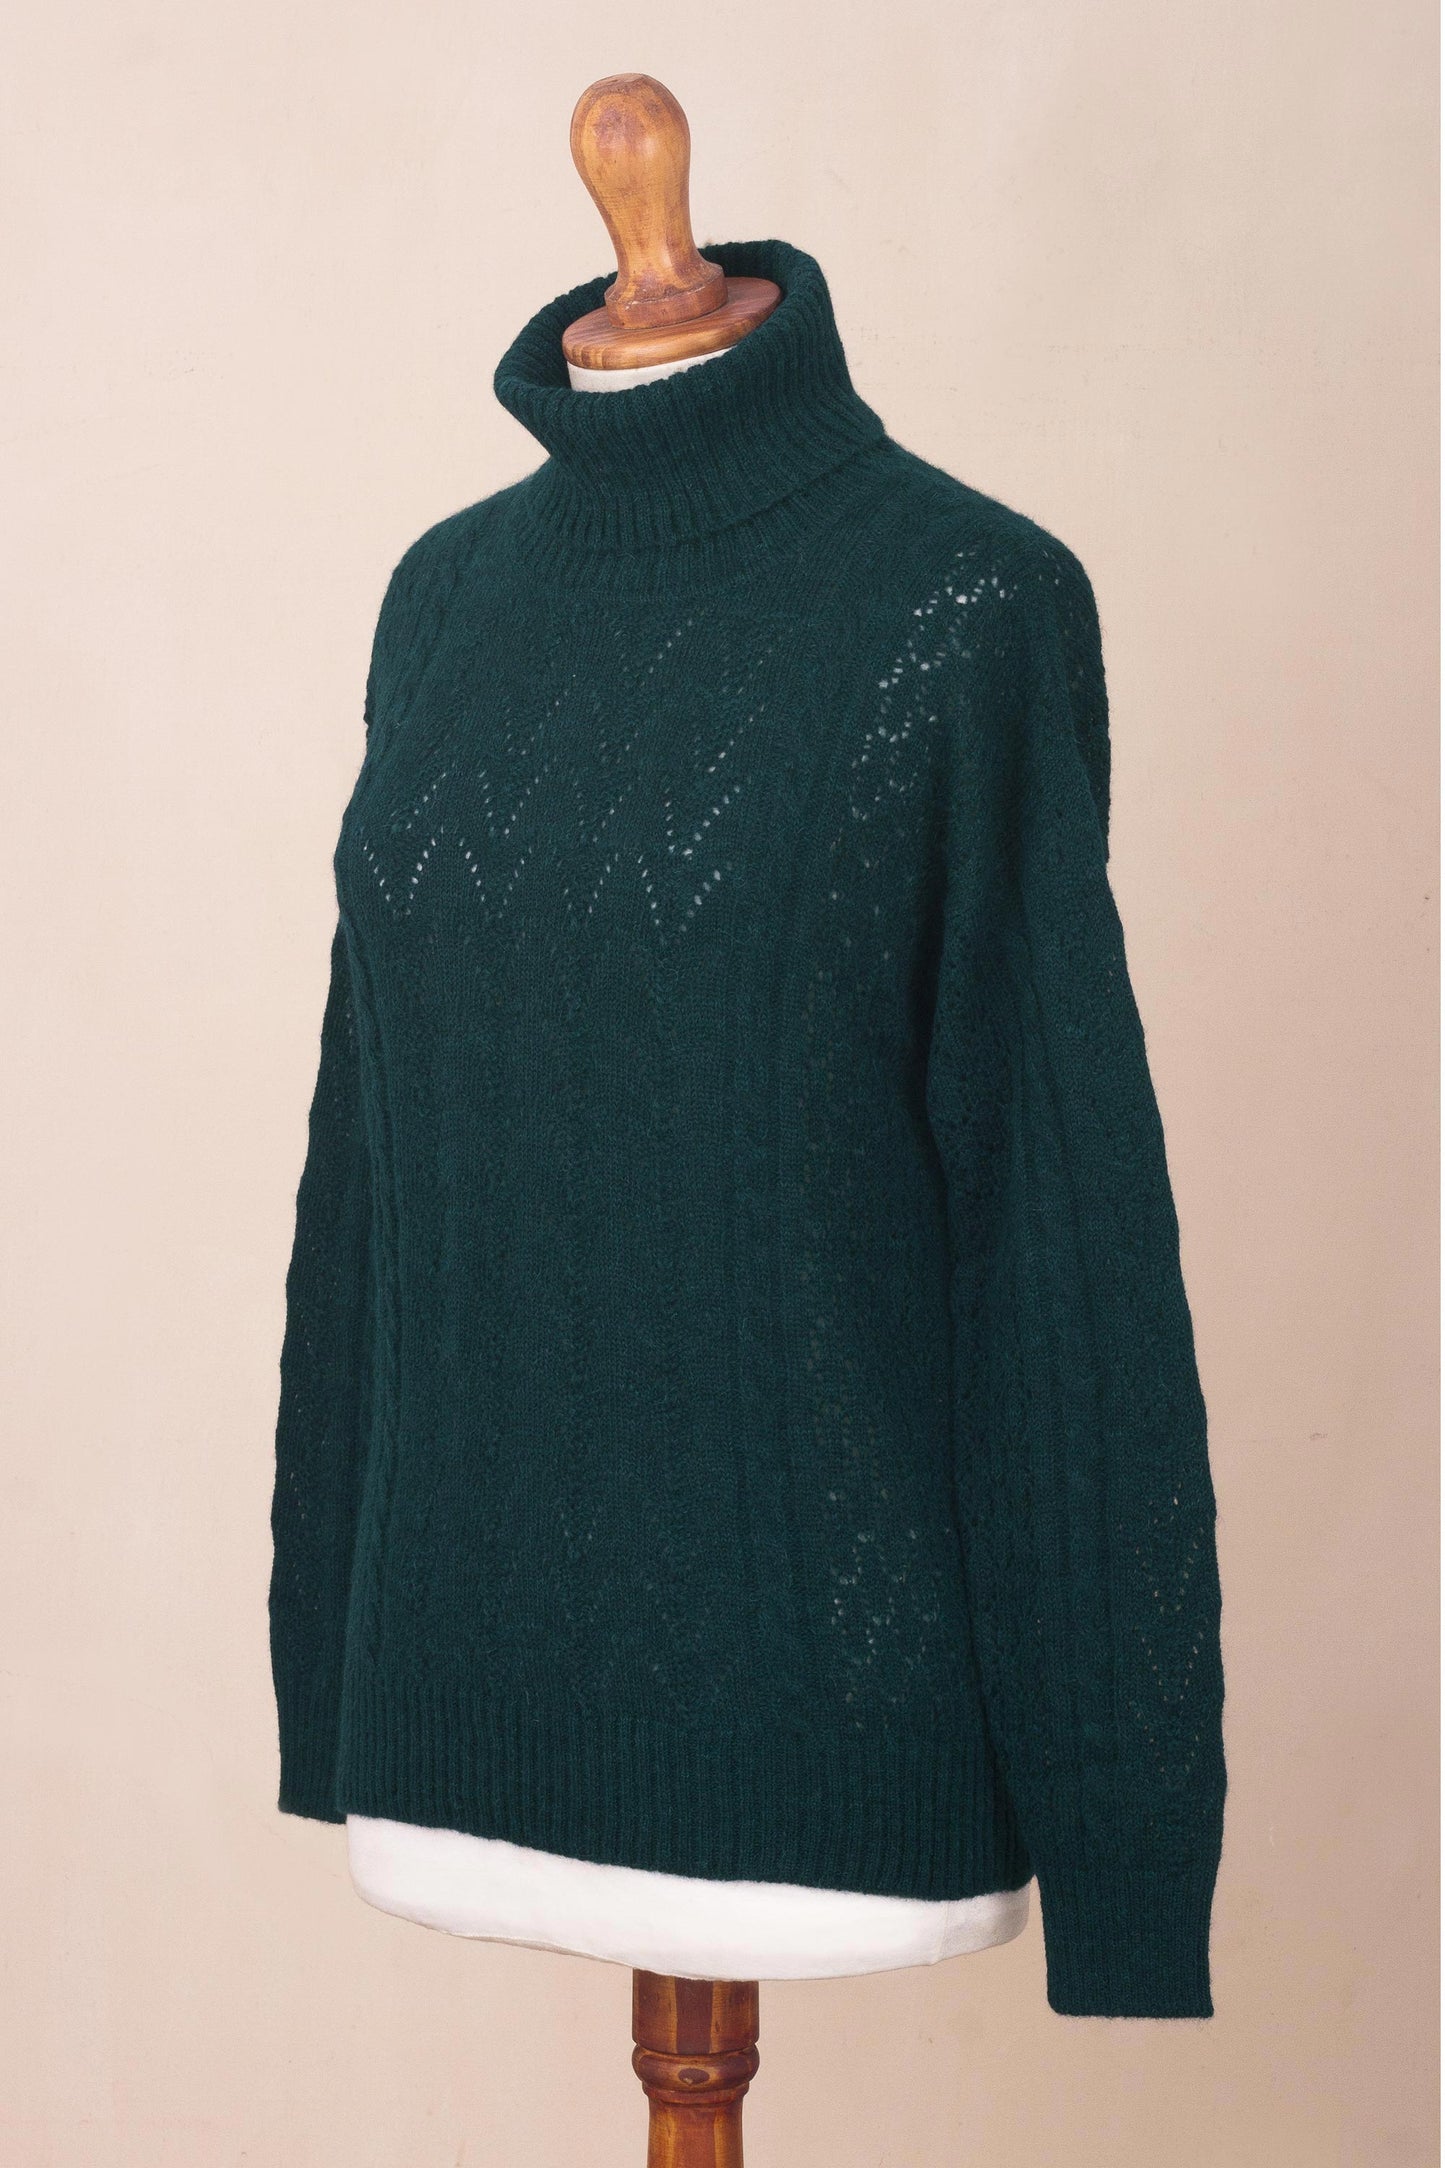 Sweet Teal Warmth Forest Spruce Teal Baby Alpaca Turtleneck Sweater